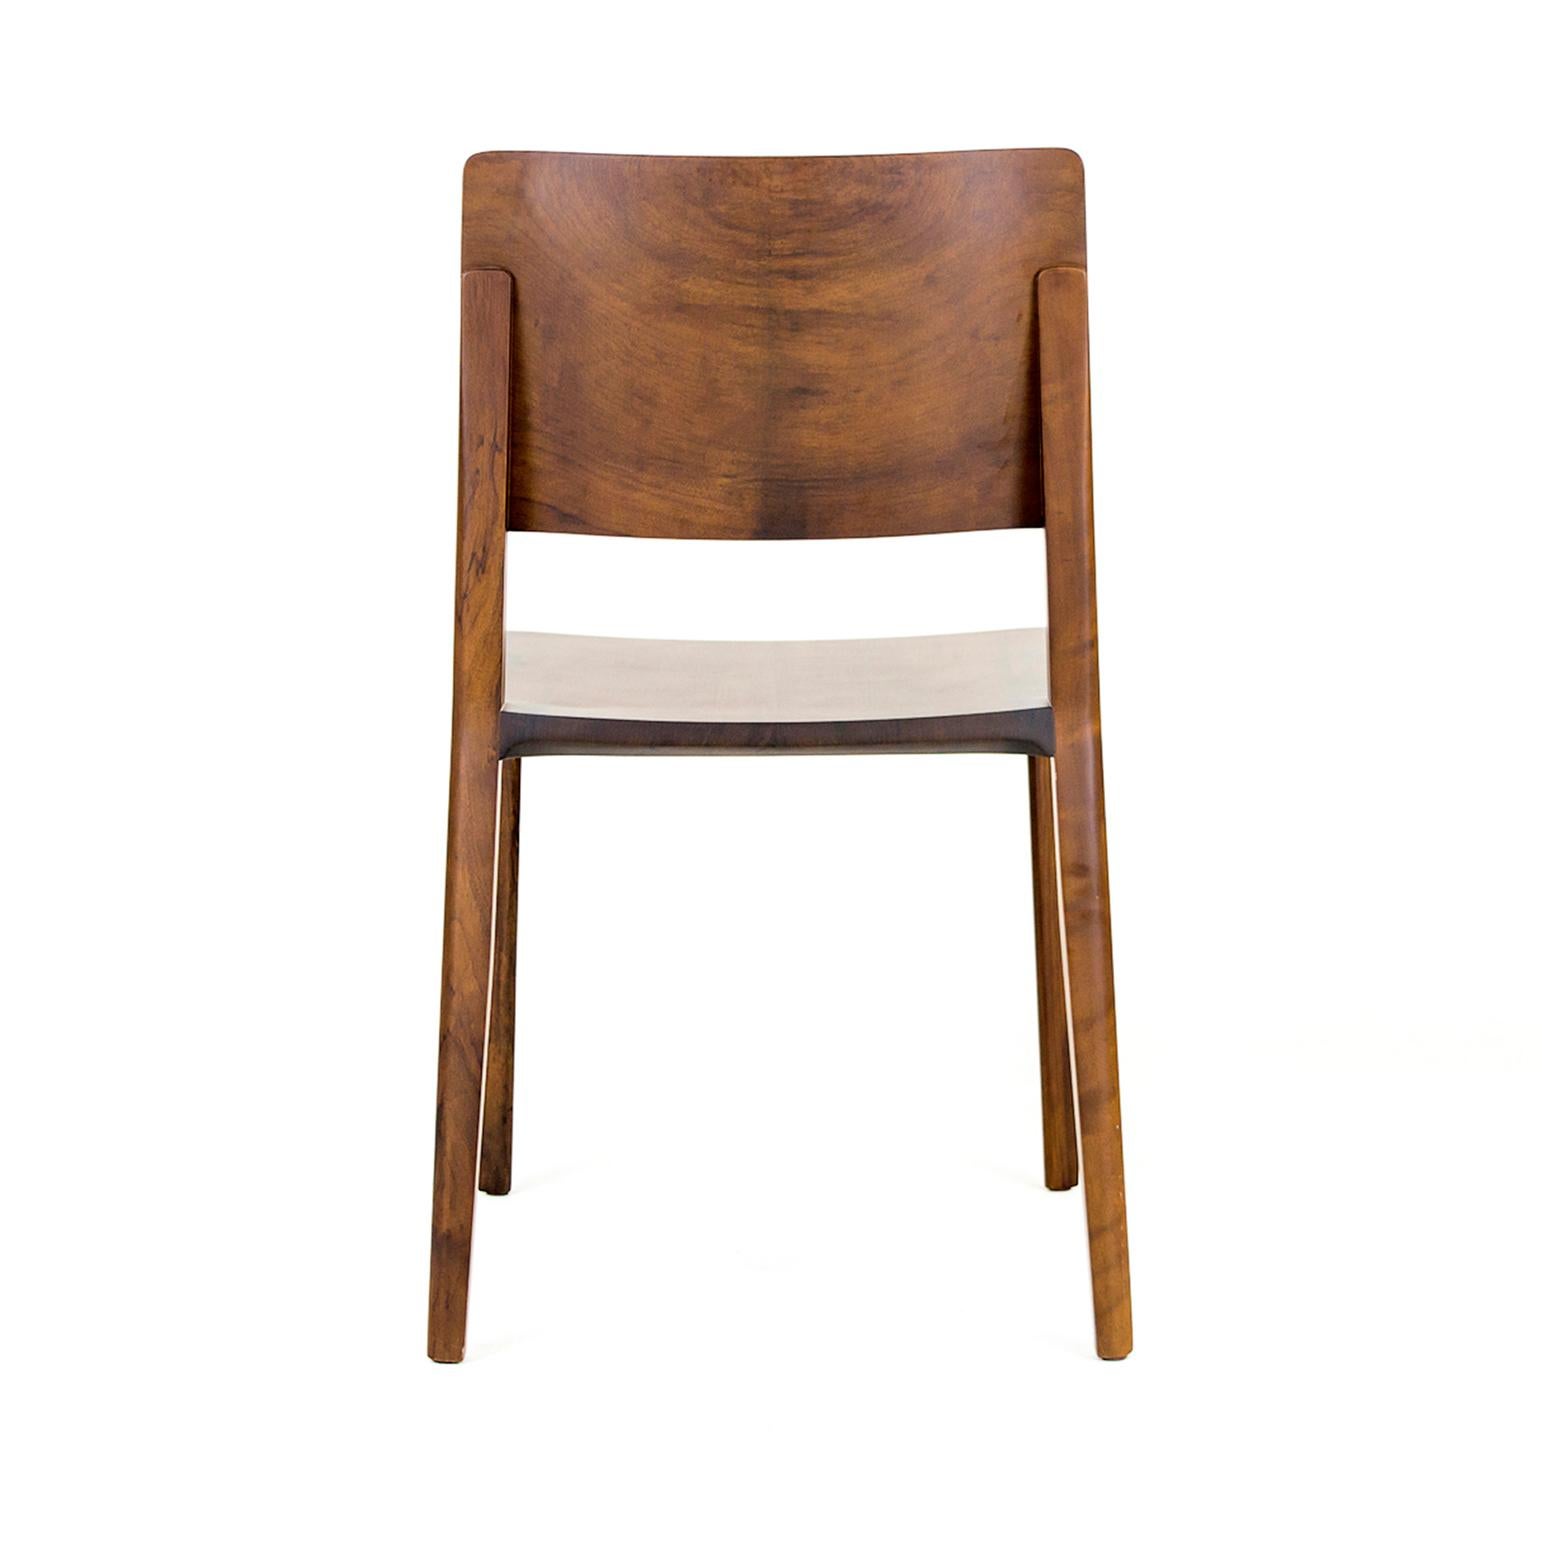 Contemporary Minimalist Chair in Black Imbuia Hardwood Limited Edition with Arms